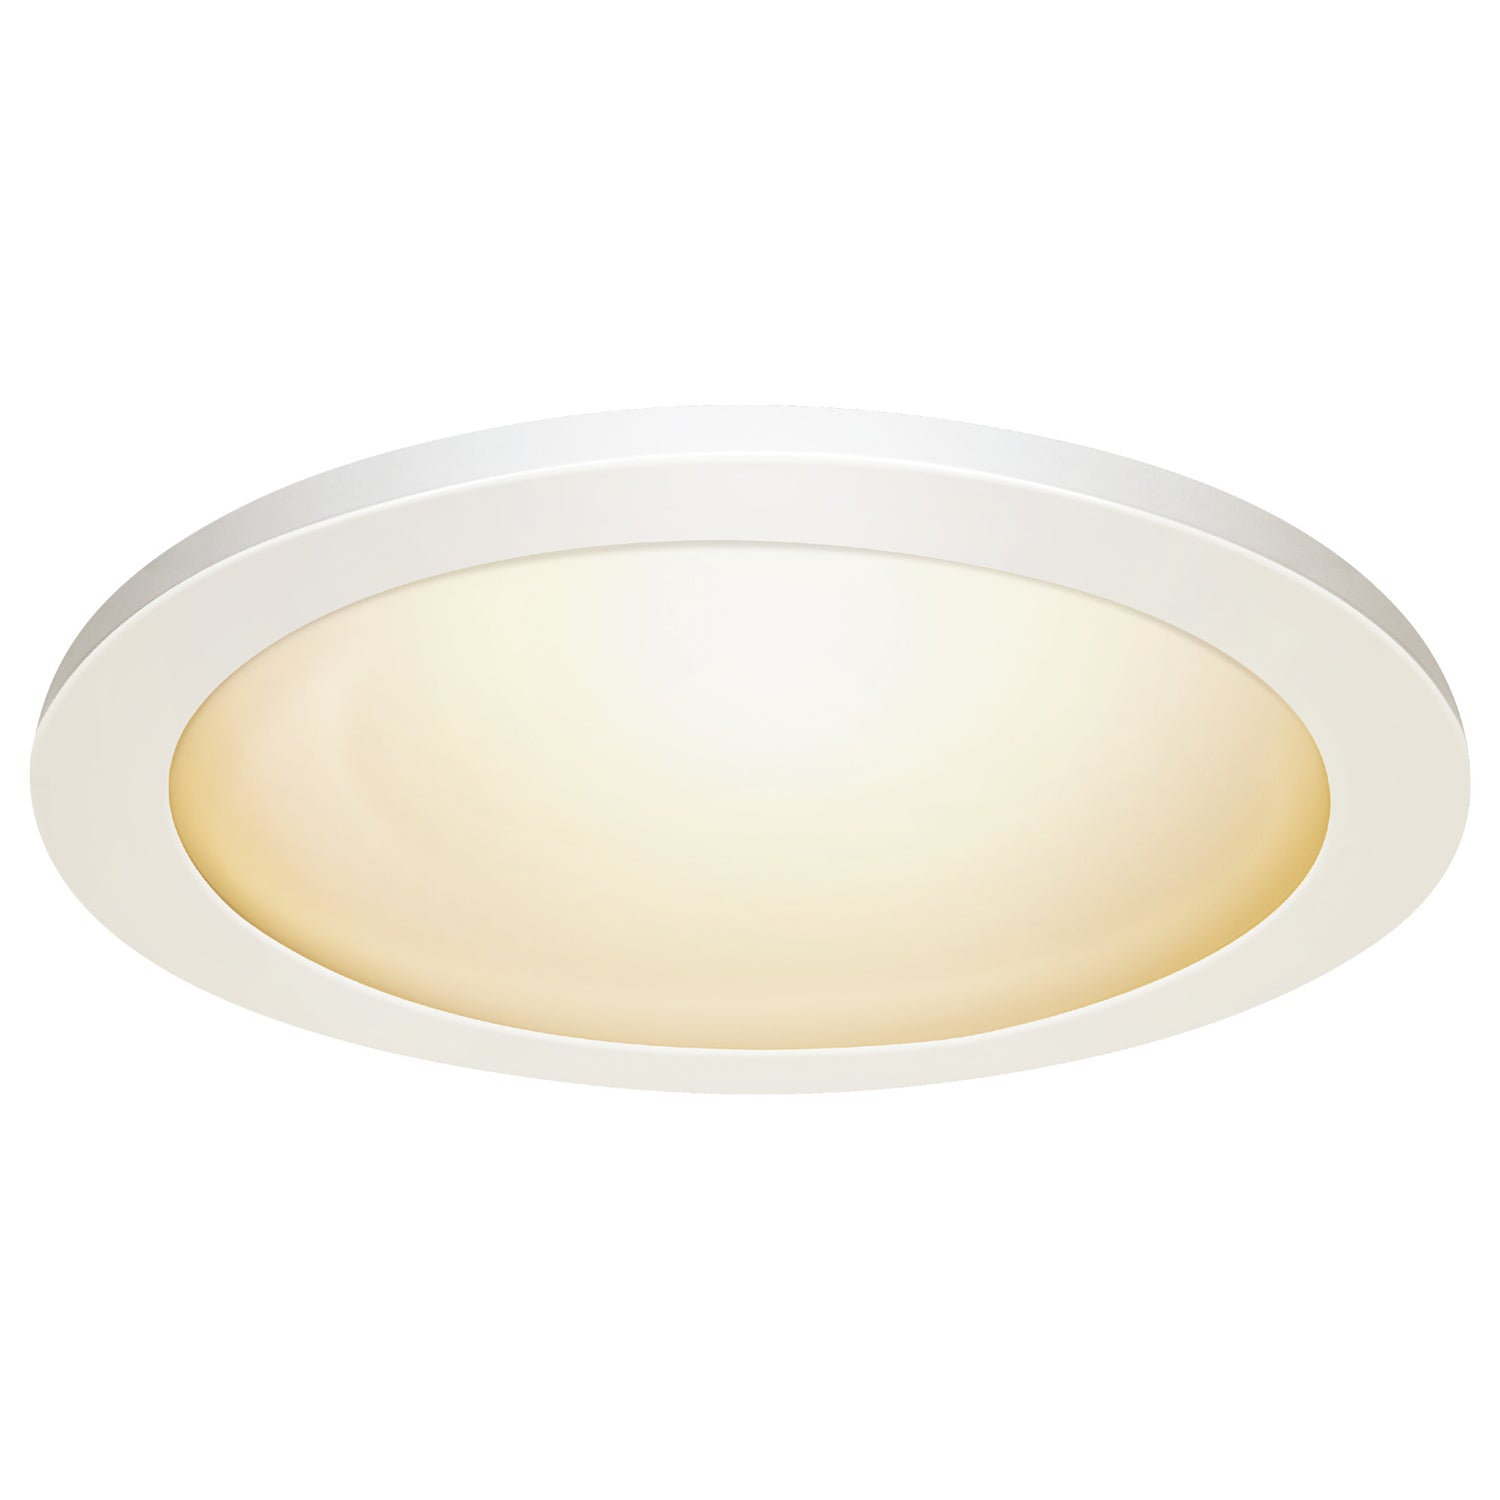 11 in. 12.5W (22W Replacement) Color Selectable (5CCT) White Round Flat Panel Ceiling Downlight